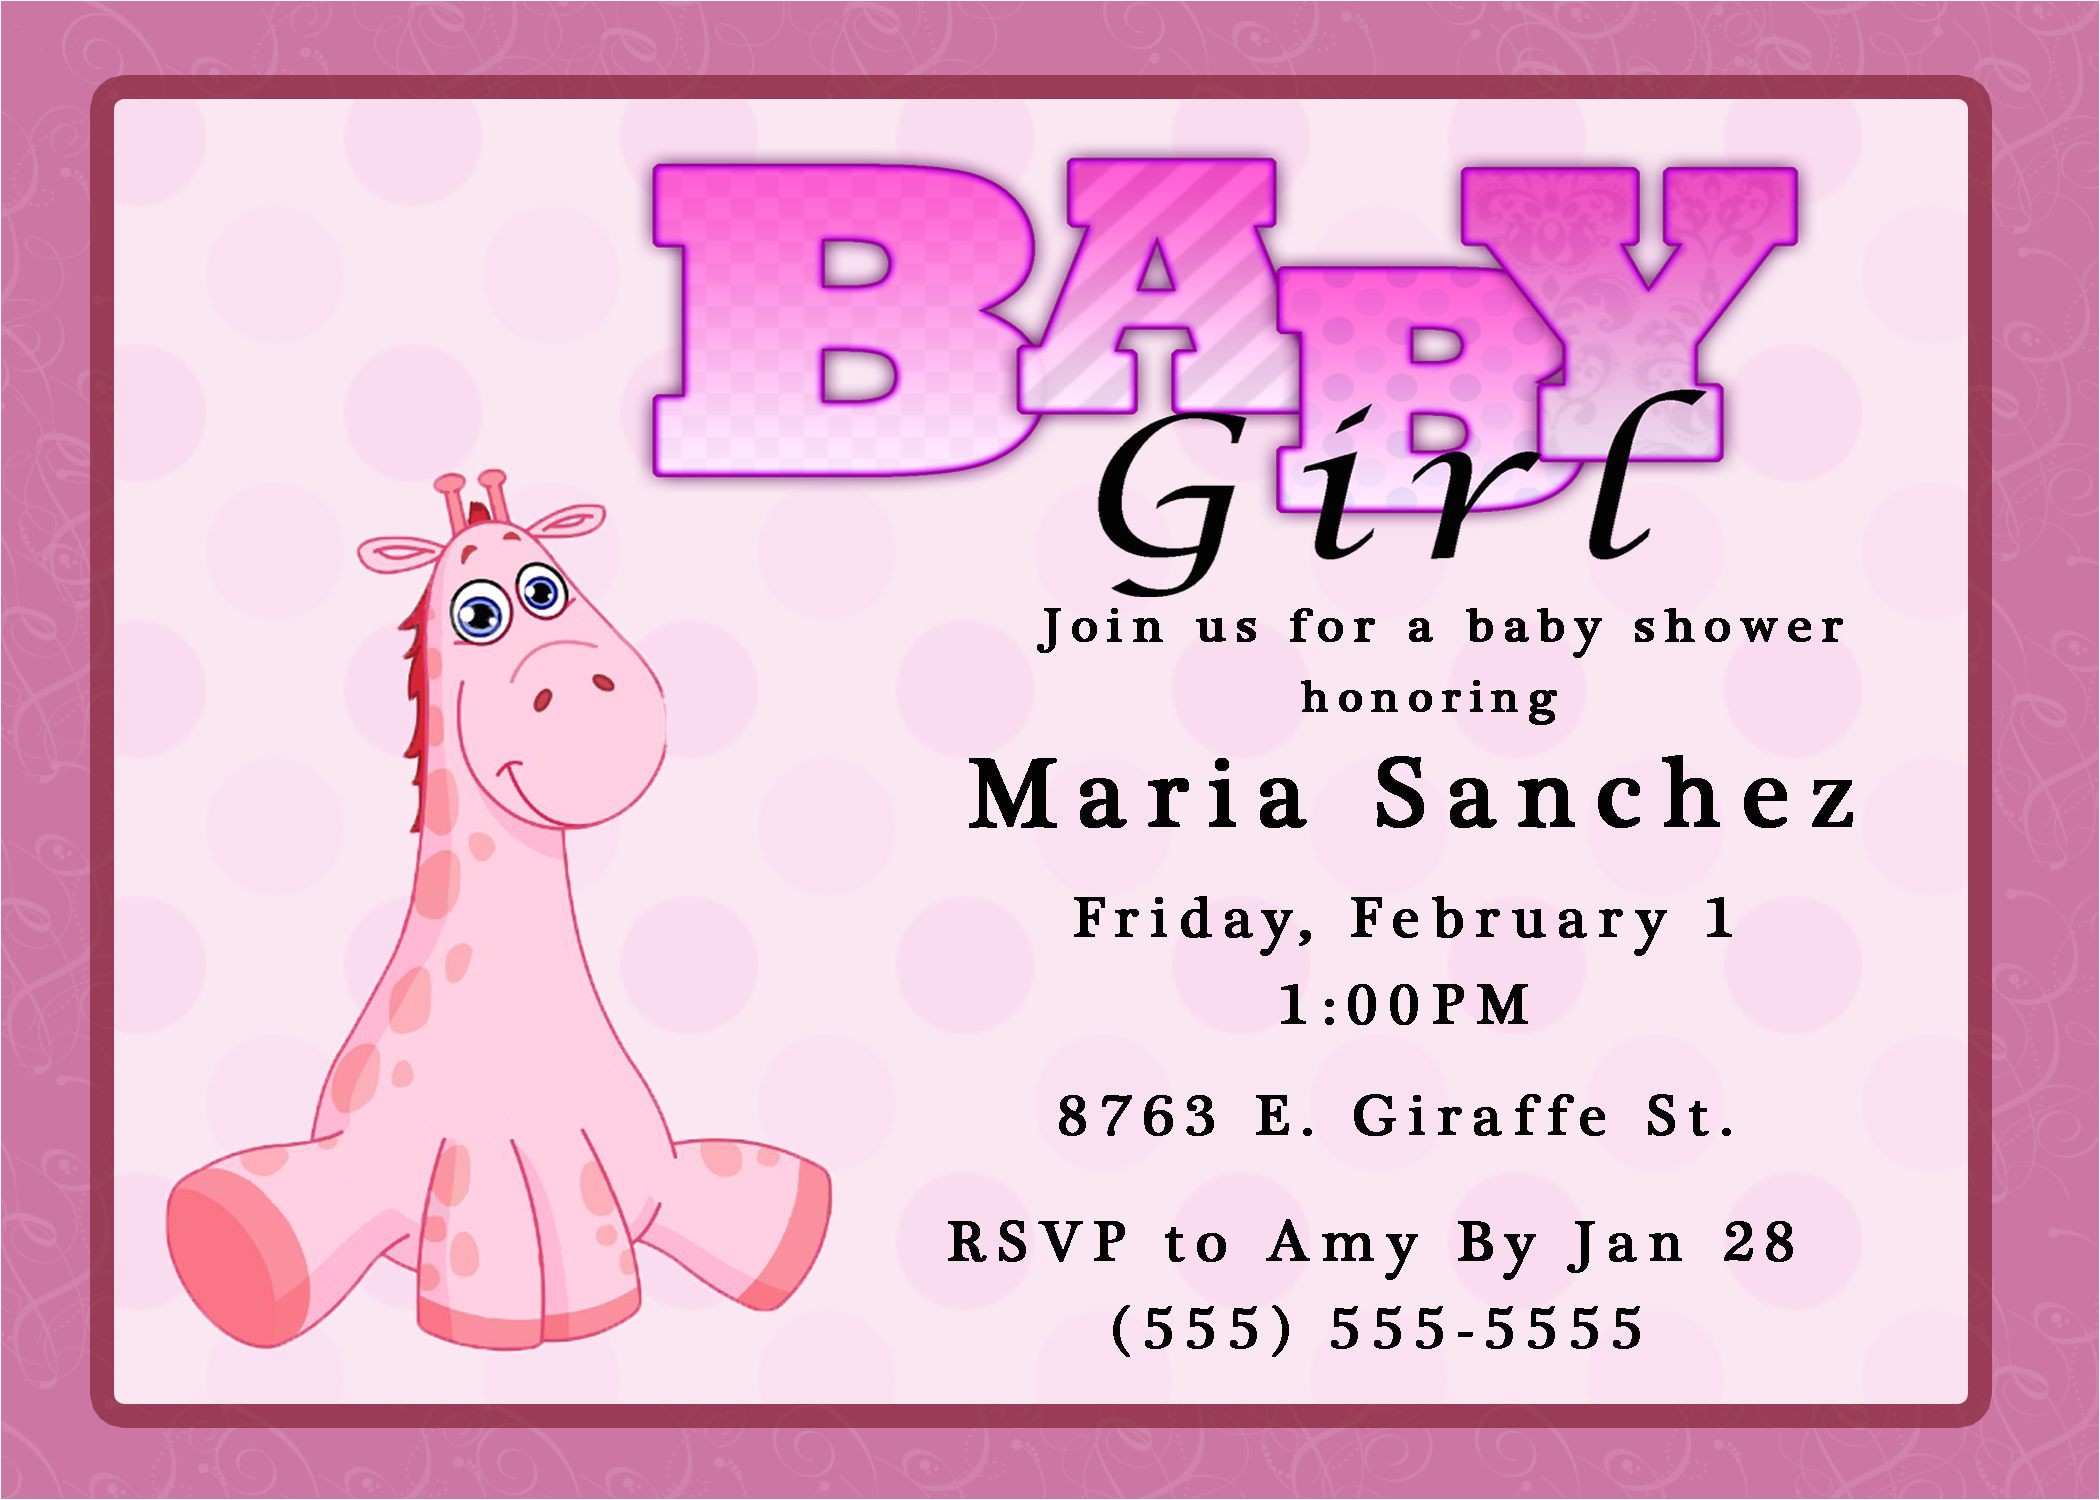 Party City Girl Birthday Invitations Party City Invitations for Baby Shower Various